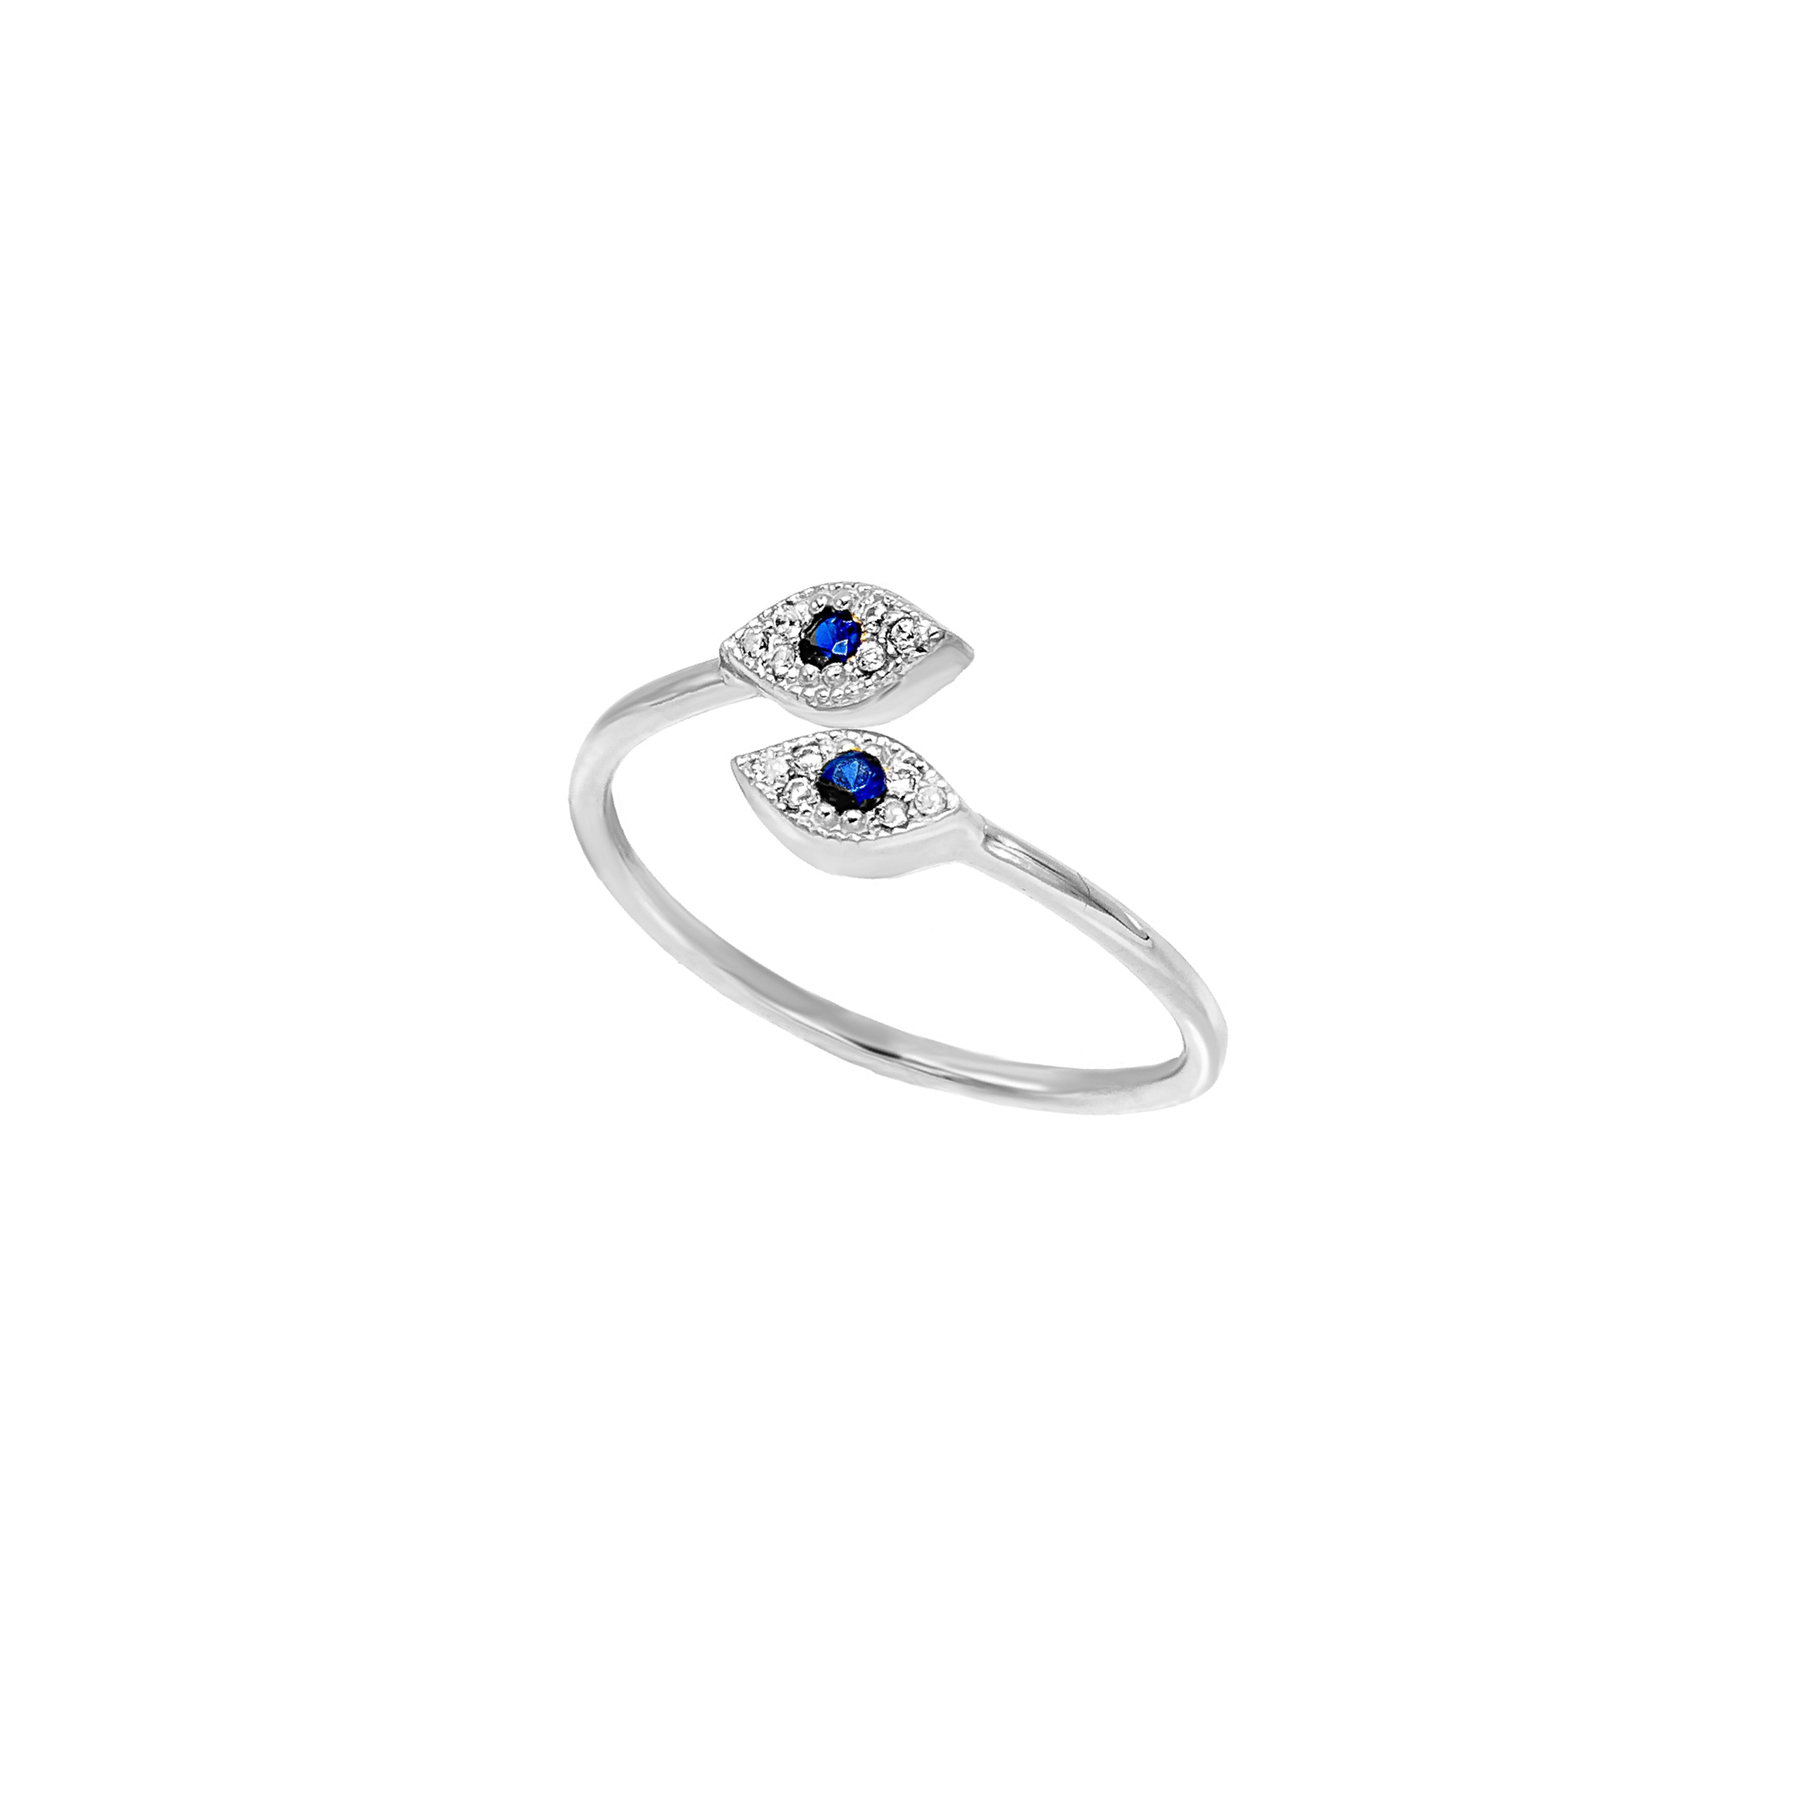 Buy Tiny Evil Eye Ring, Dainty Stacking Ring, Minimalist Jewelry, Good Luck  Charm, Protection Ring, 925 Sterling Silver Ring, Bohemian Fashion. Online  in India - Etsy